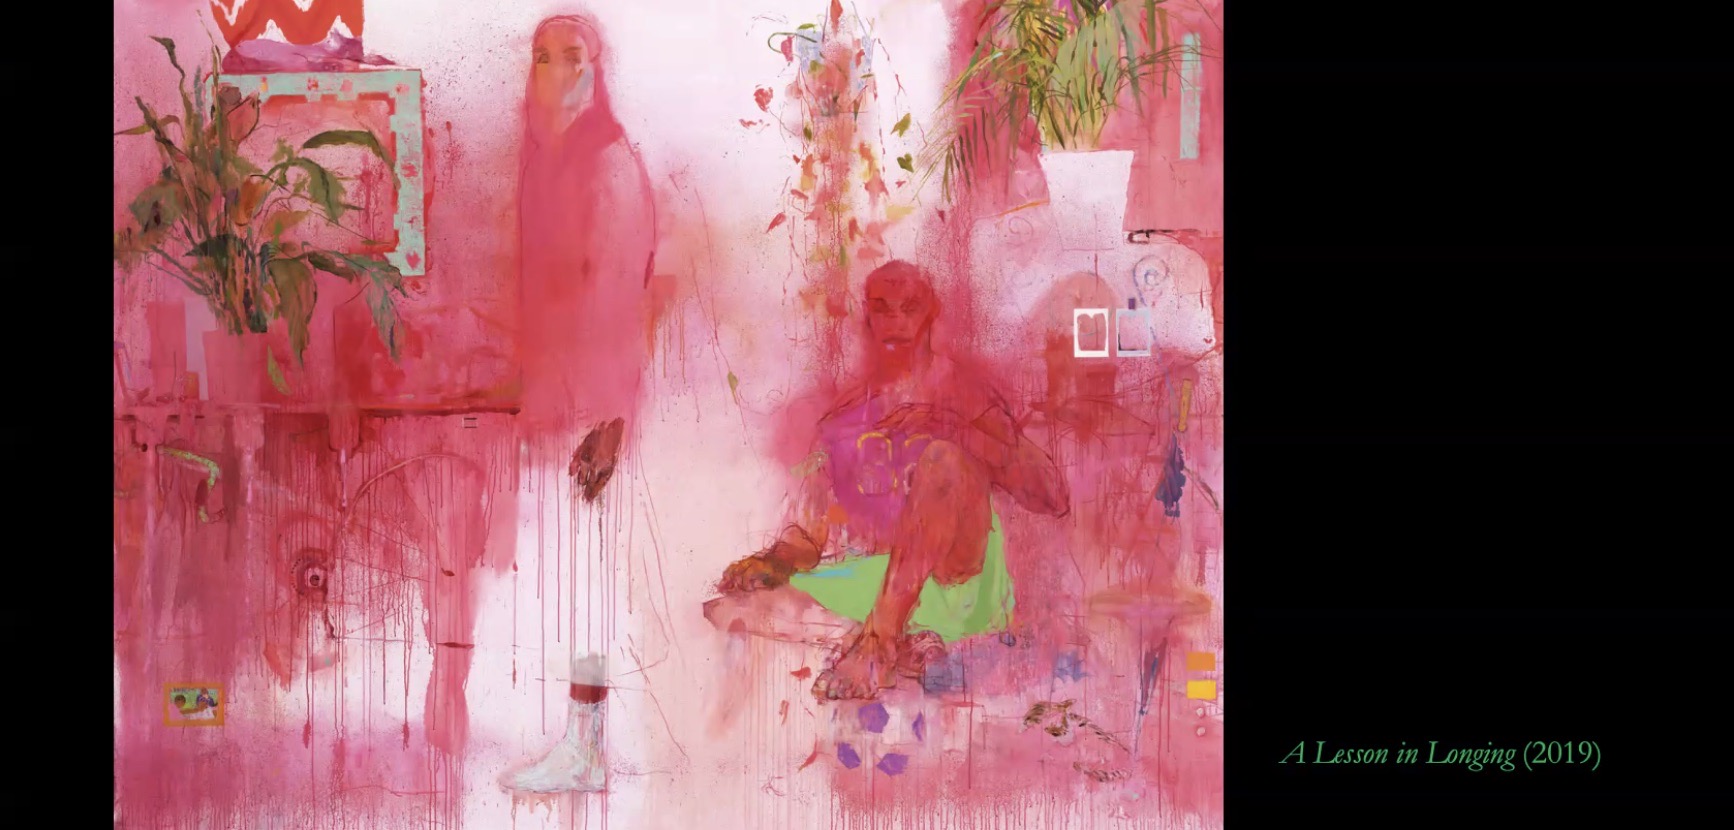 A painting of a man and a woman surrounded by fuchsia paint